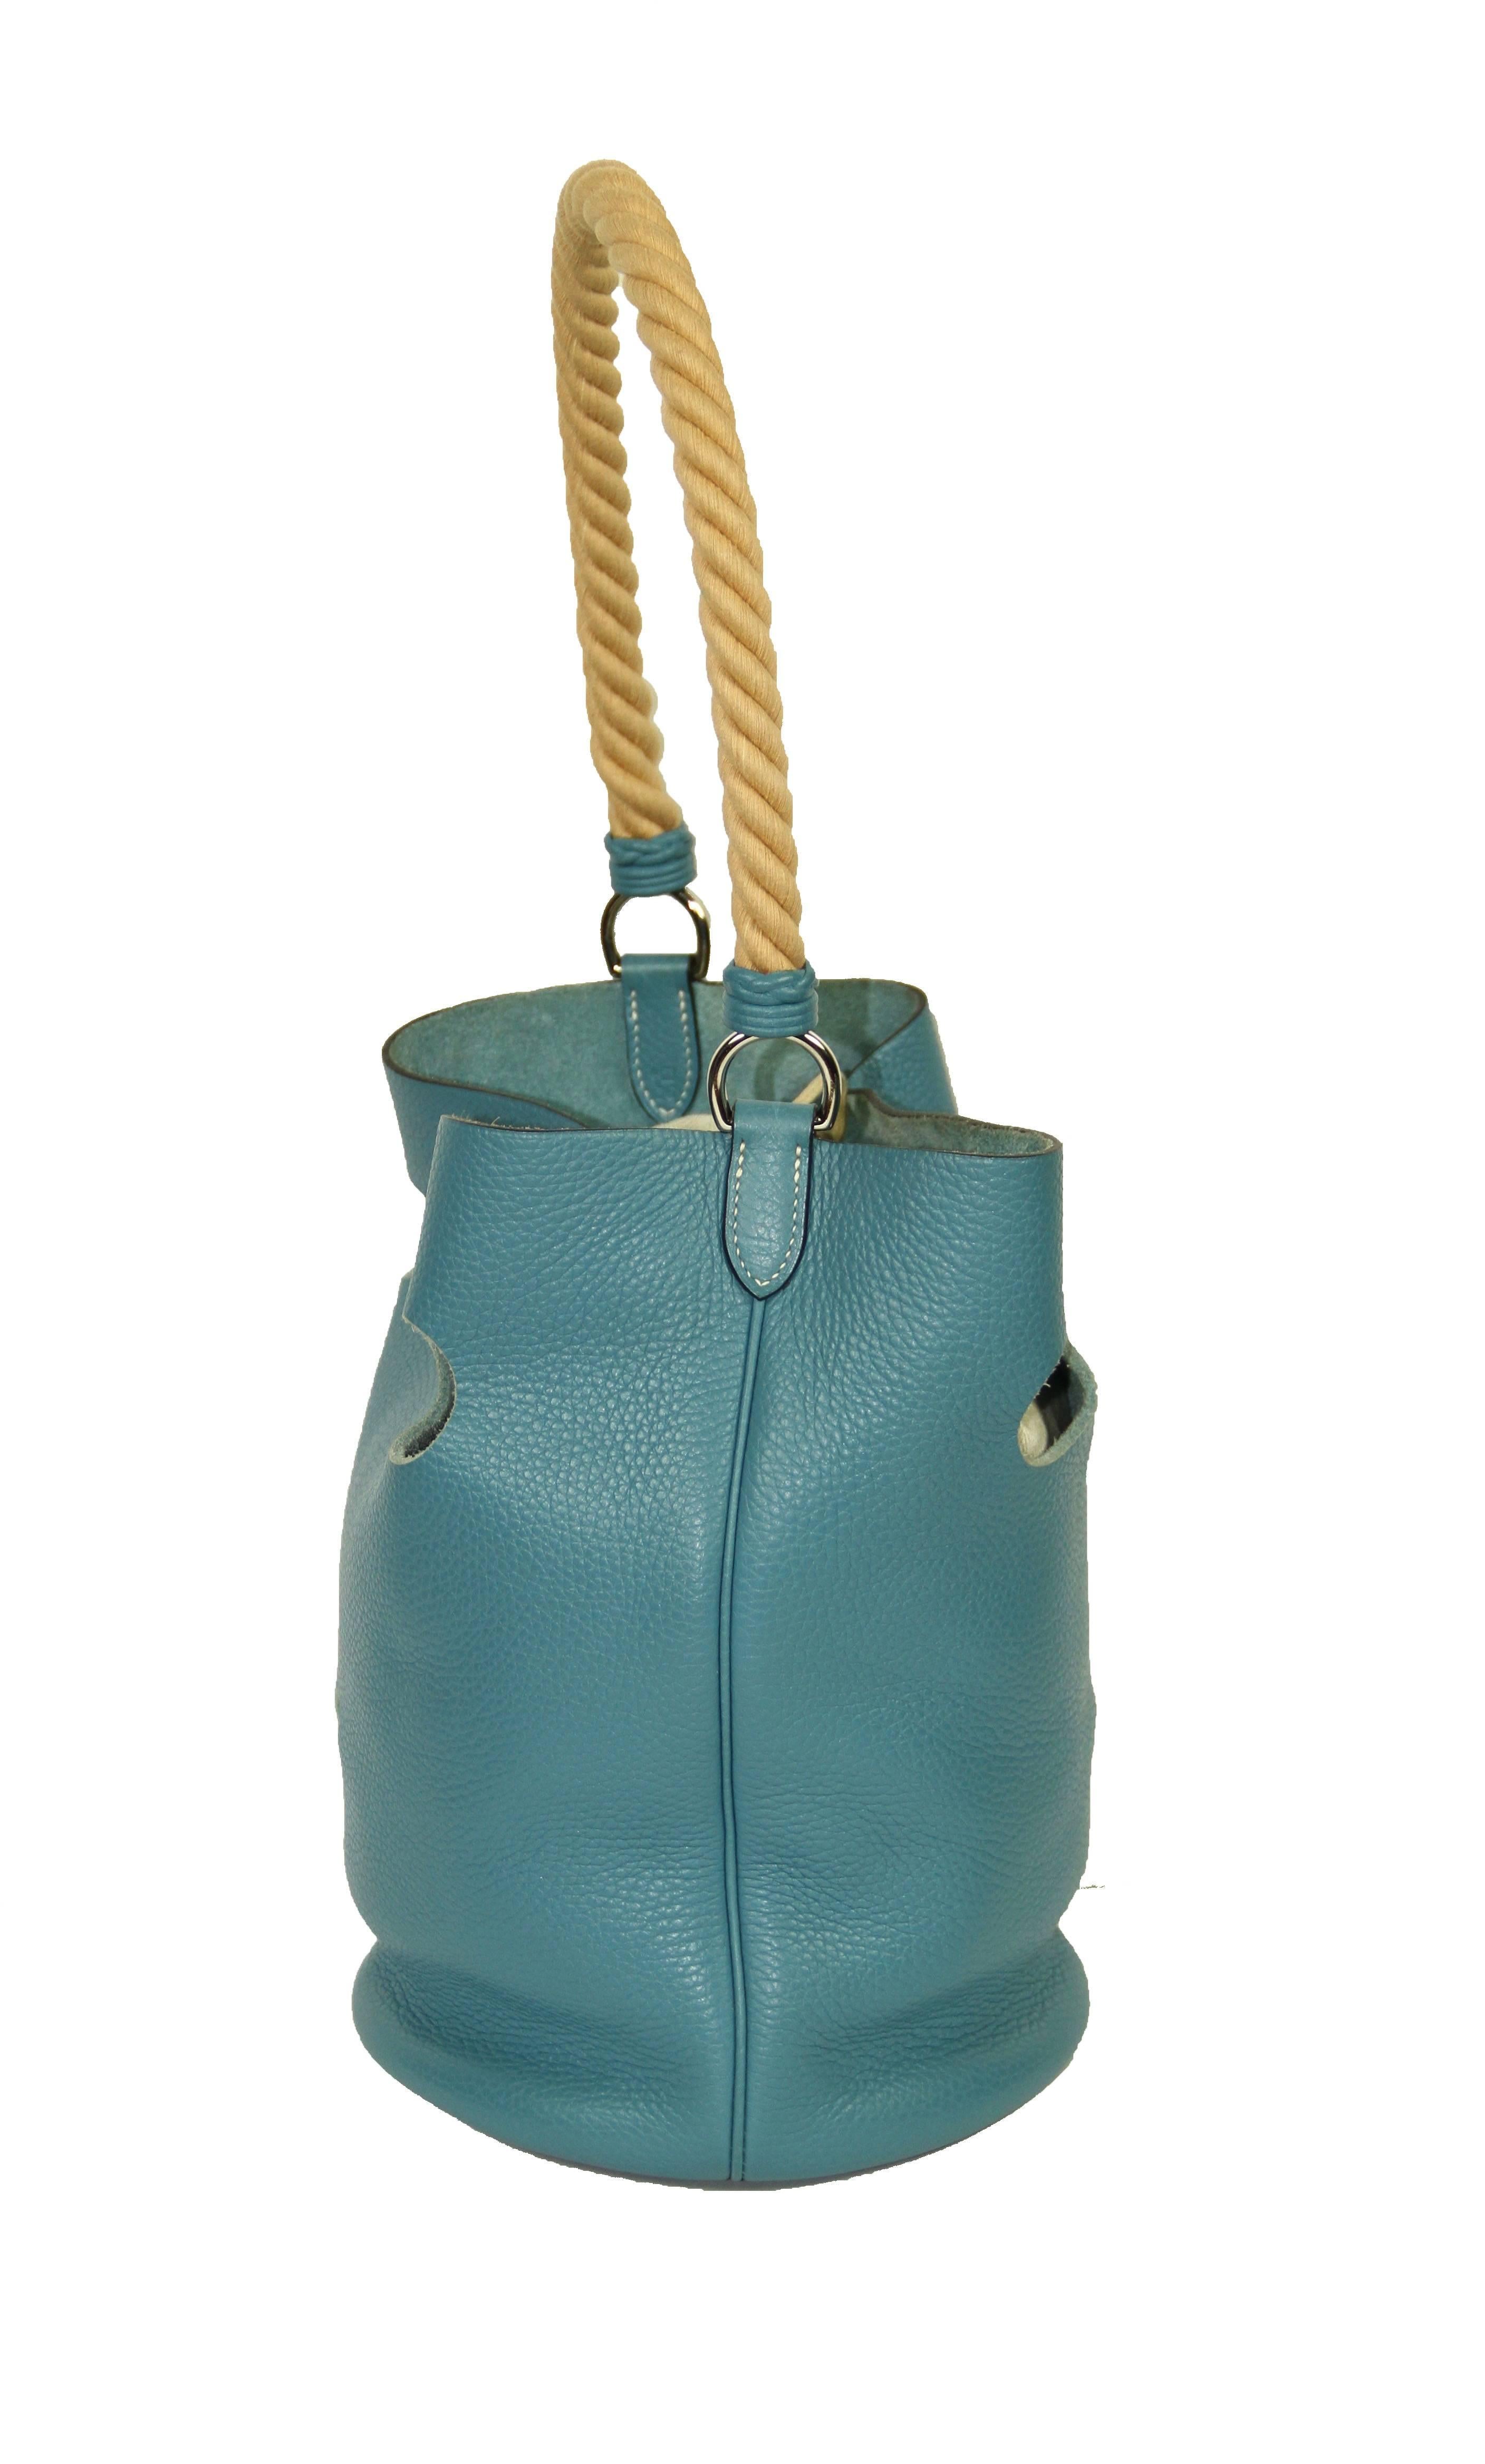 This amazing bag was inspired by the bag Equestrians used for horse feed. This bucket style bag is designed with a rope shoulder strap. It features a circular cut out design and an open top.

Year: 2005 
Material: Clémence Taurillon leather
Color: